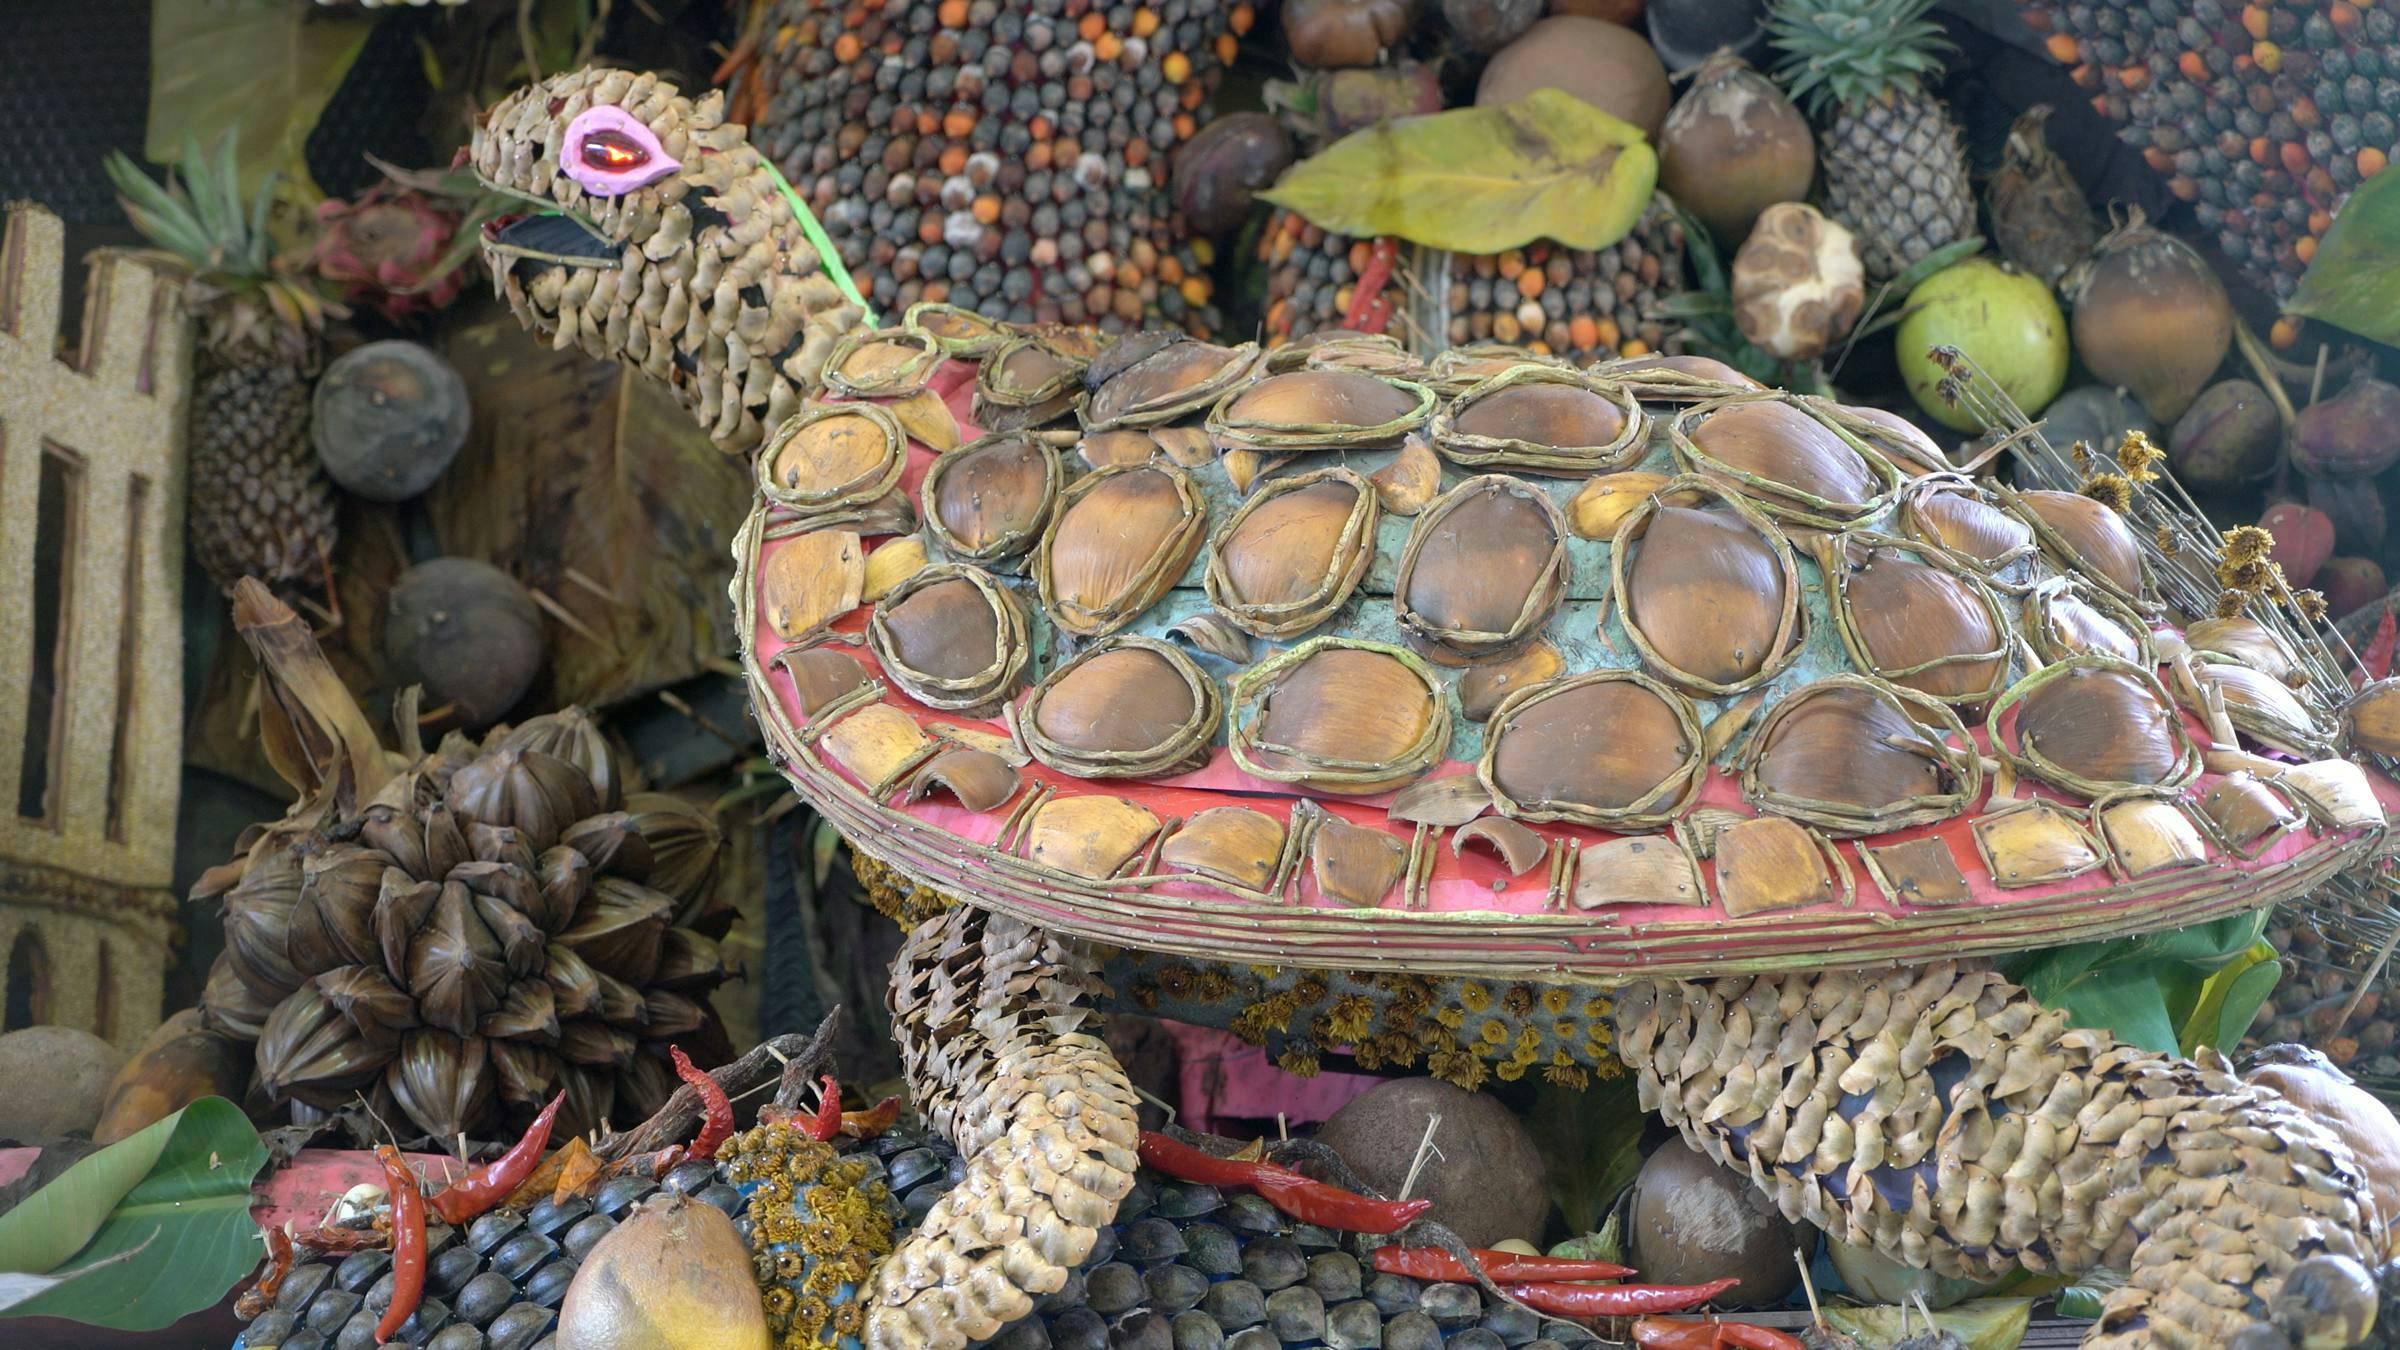 Image of a turtle made out of lots of different stones. The turtle is sat in a setting also made from many different objects such as stones and pineapples.